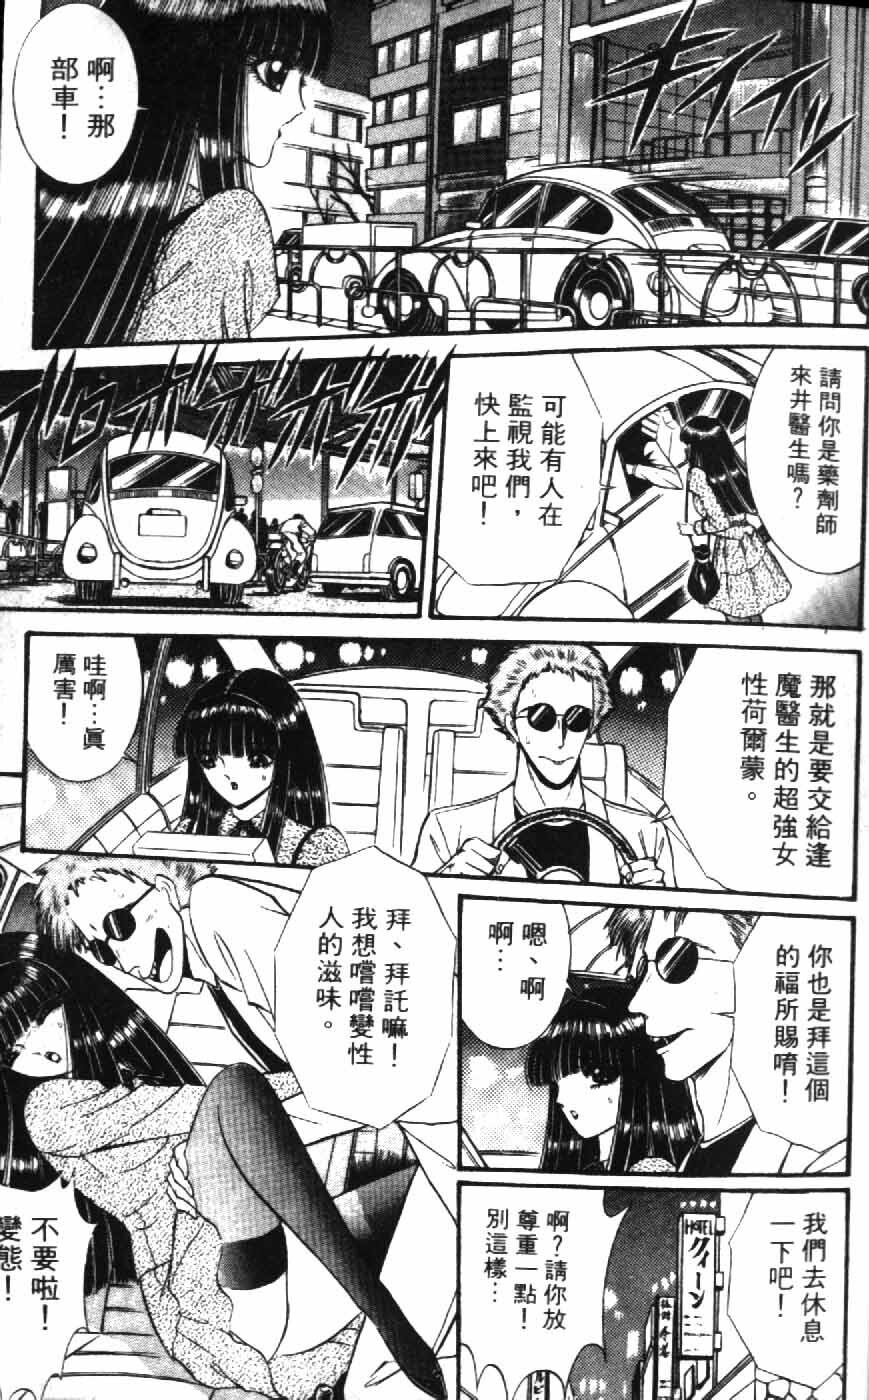 [Senno Knife] Ouma ga Horror Show 1 - Trans Sexual Special Show 1 | 顫慄博覽會 1 [Chinese] page 29 full